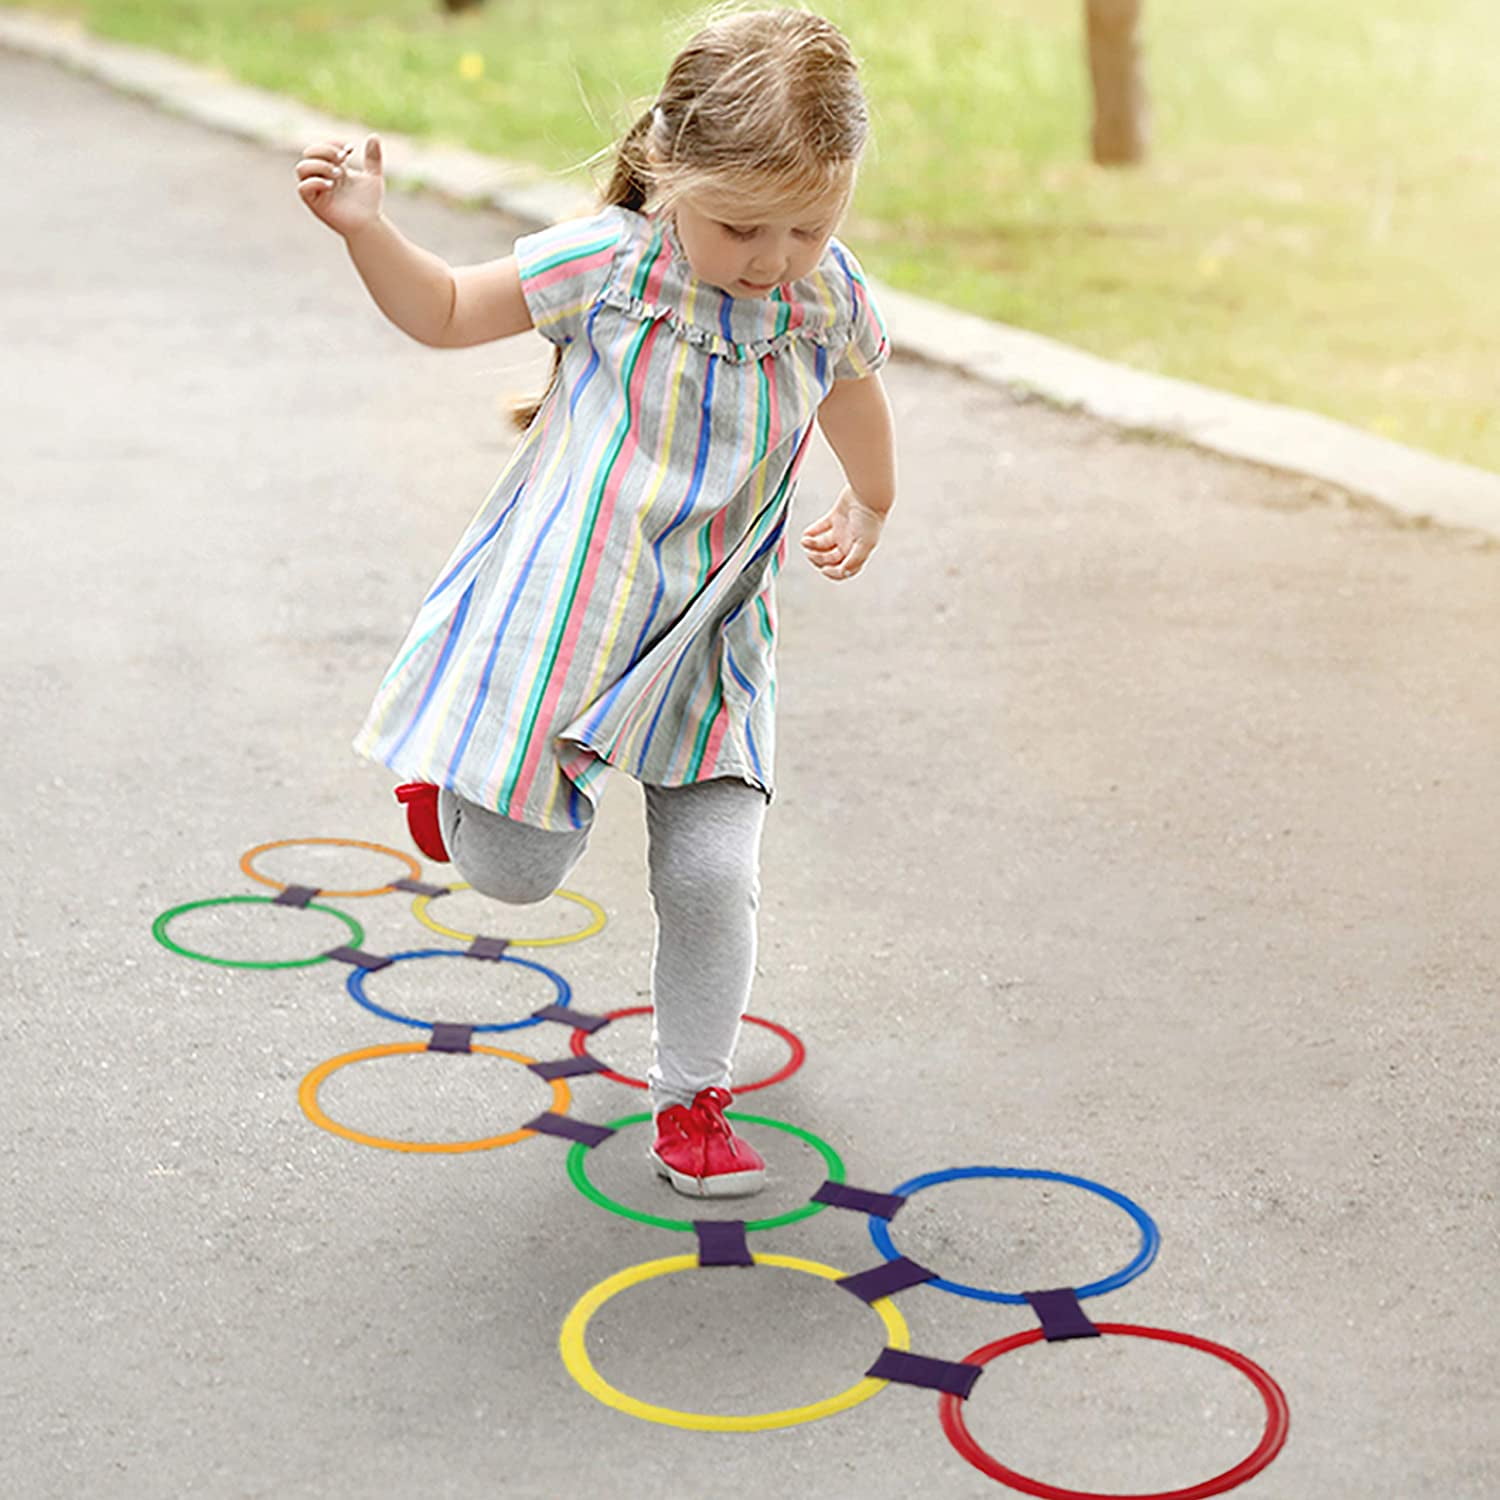 JOOZ Fun Creative Play Set Hopscotch Ring Games With 10 Multi-Colored Plastic Rings And 10 Connectors For Indoor Or Outdoor Use Equipment Sold As a Unit For Playing Indoor And Outdoor Hopscotch Games